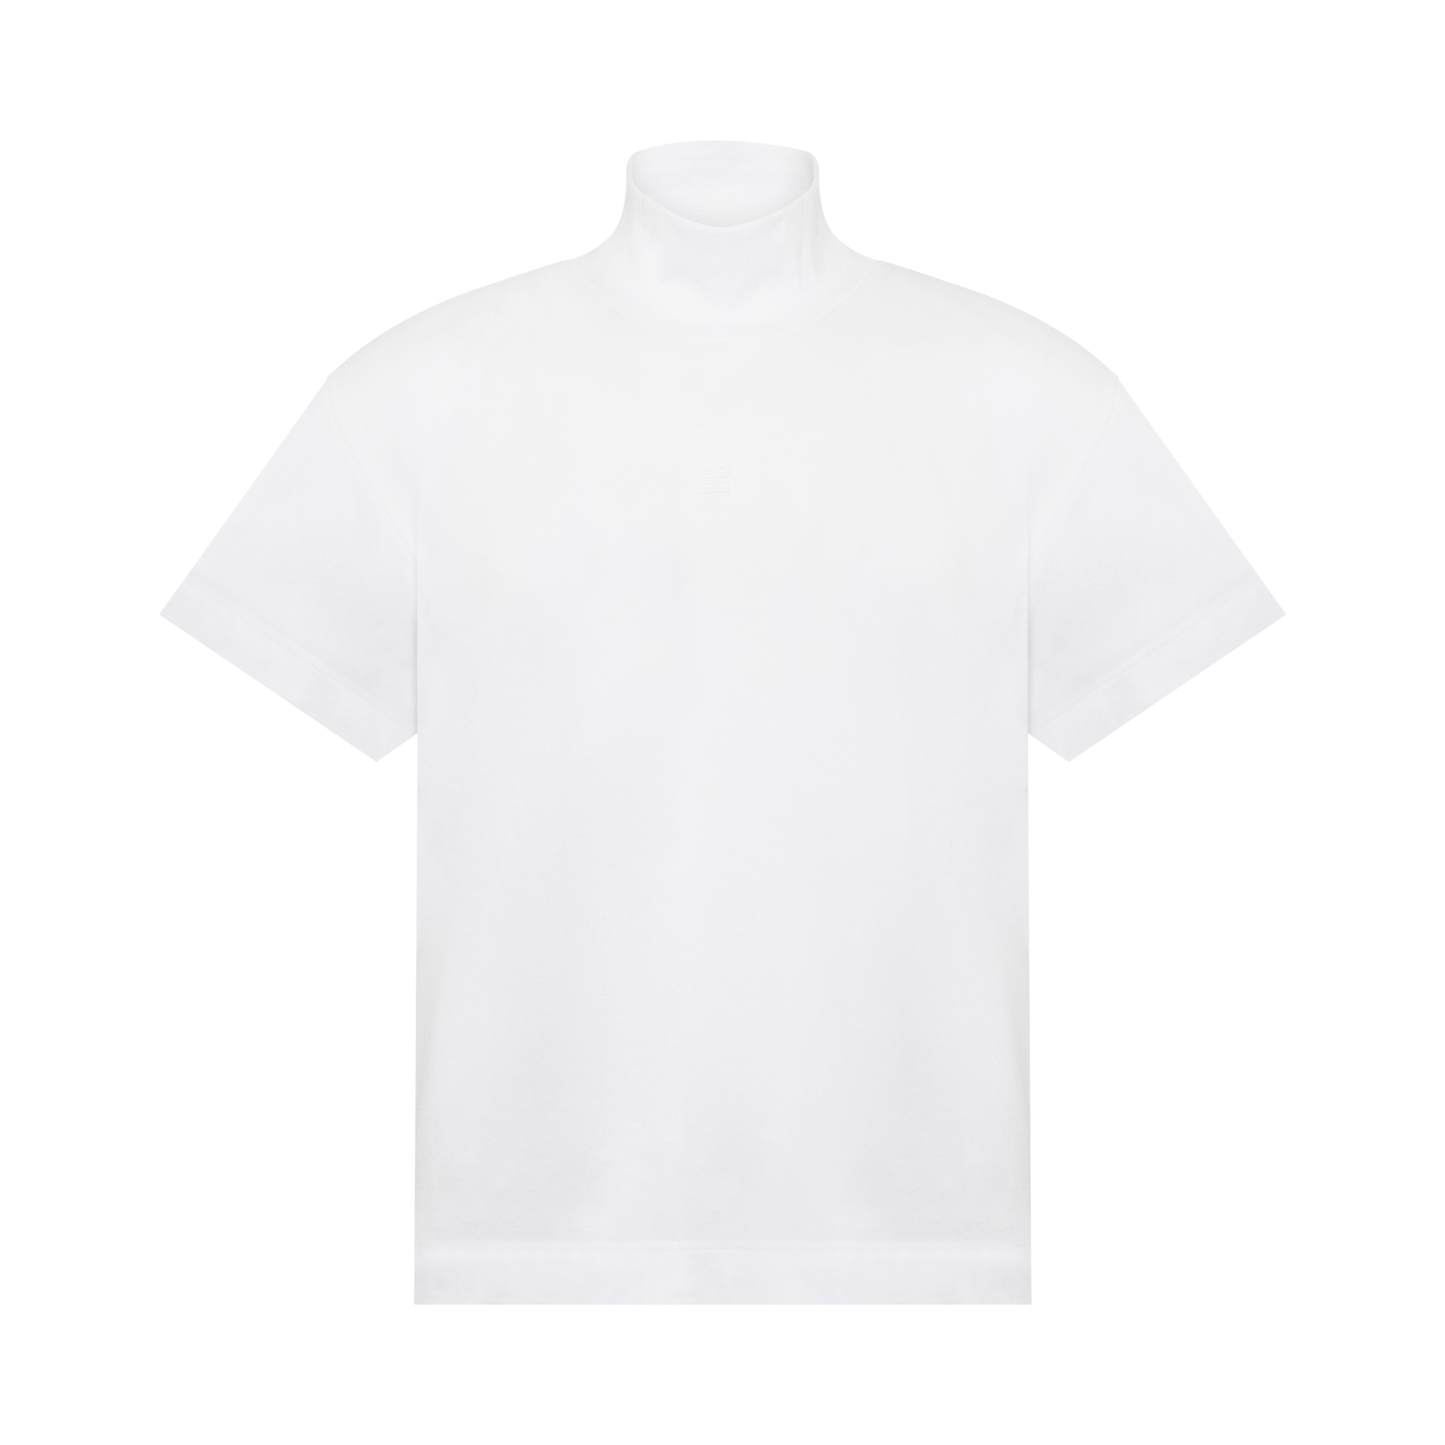 Classic Turtleneck 4G Embroidery T-Shirt in White